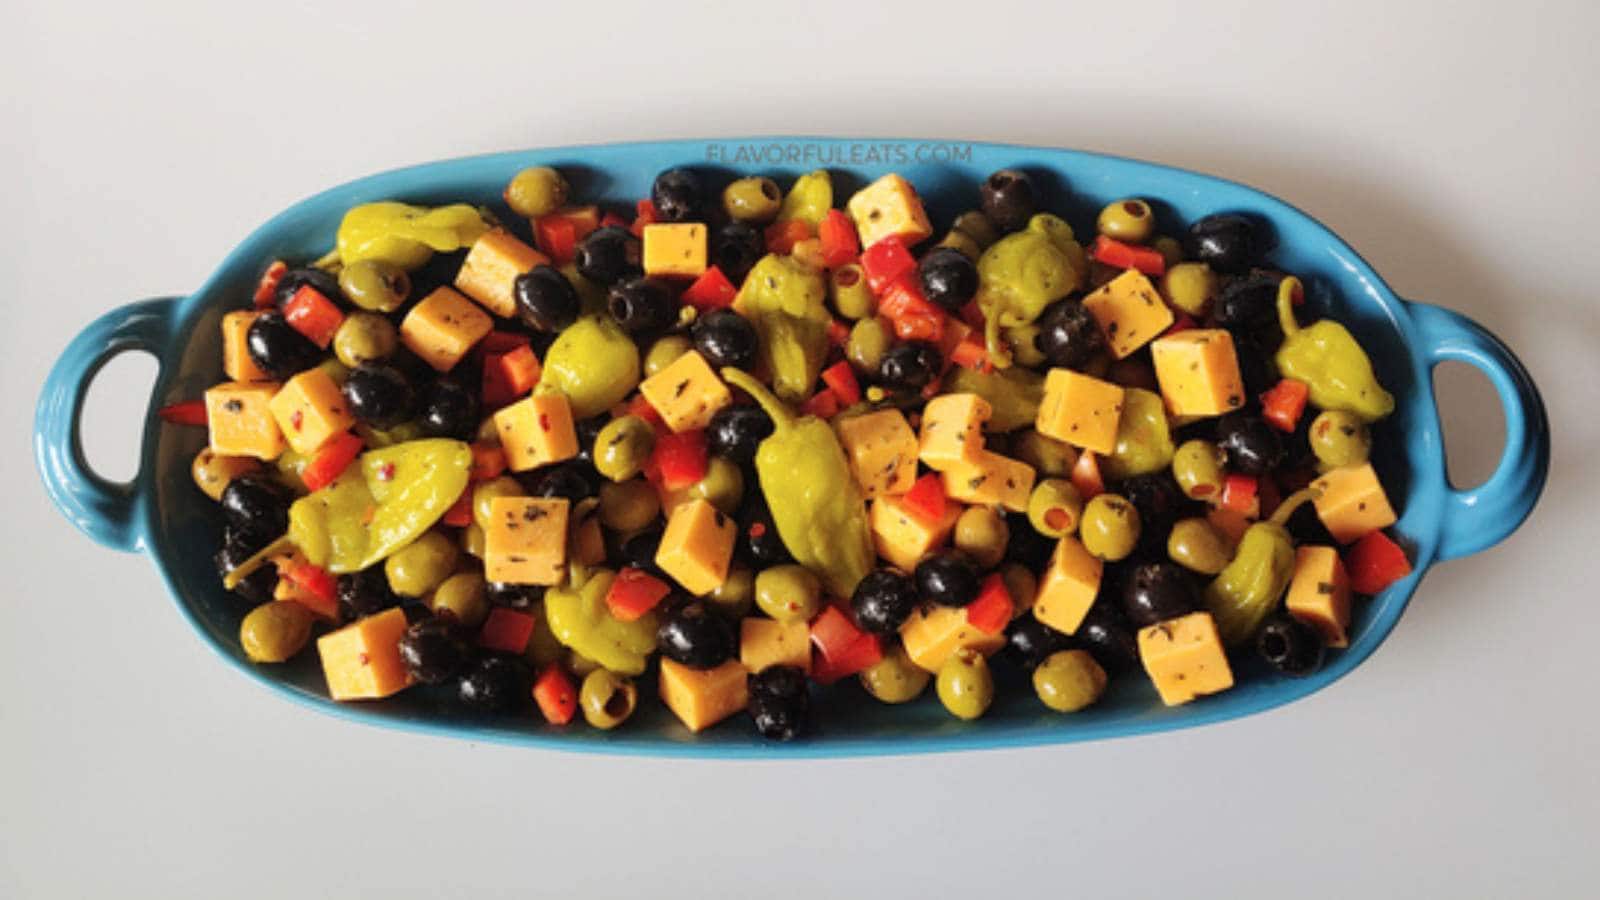 Marinated Cheese And Olive Antipasto recipe by Flavorful Eats.